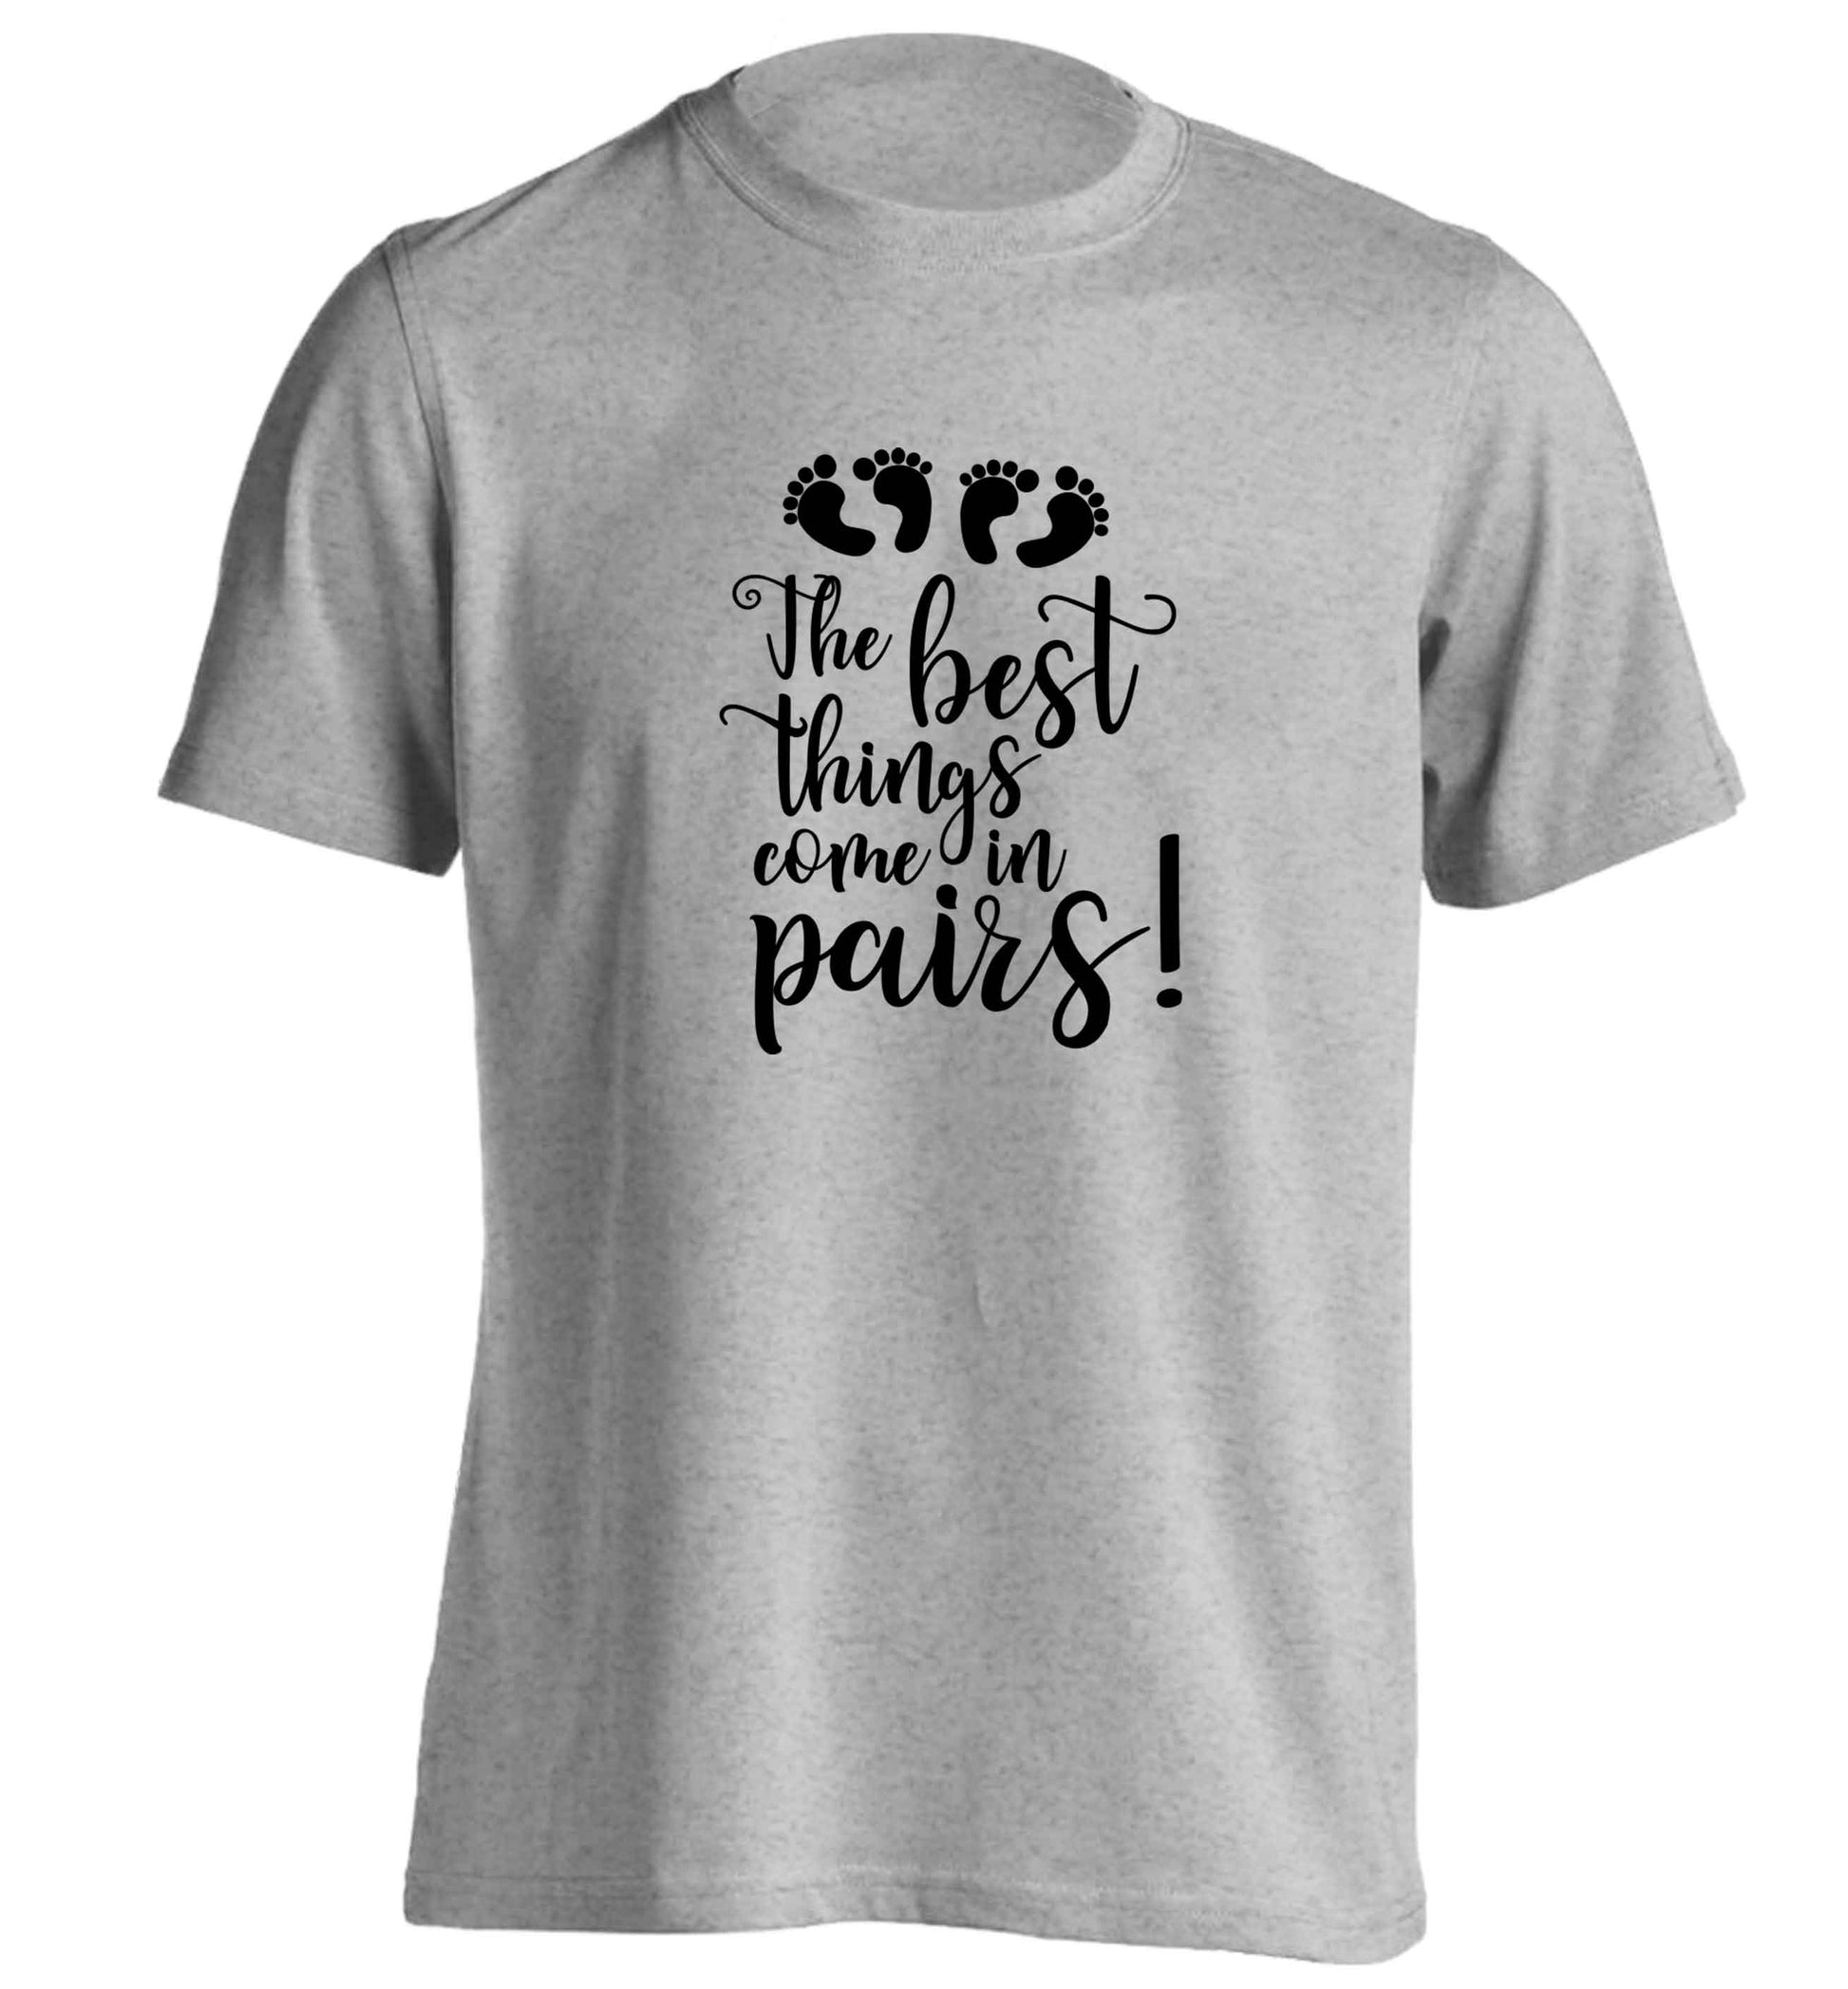 The best things come in pairs! adults unisex grey Tshirt 2XL